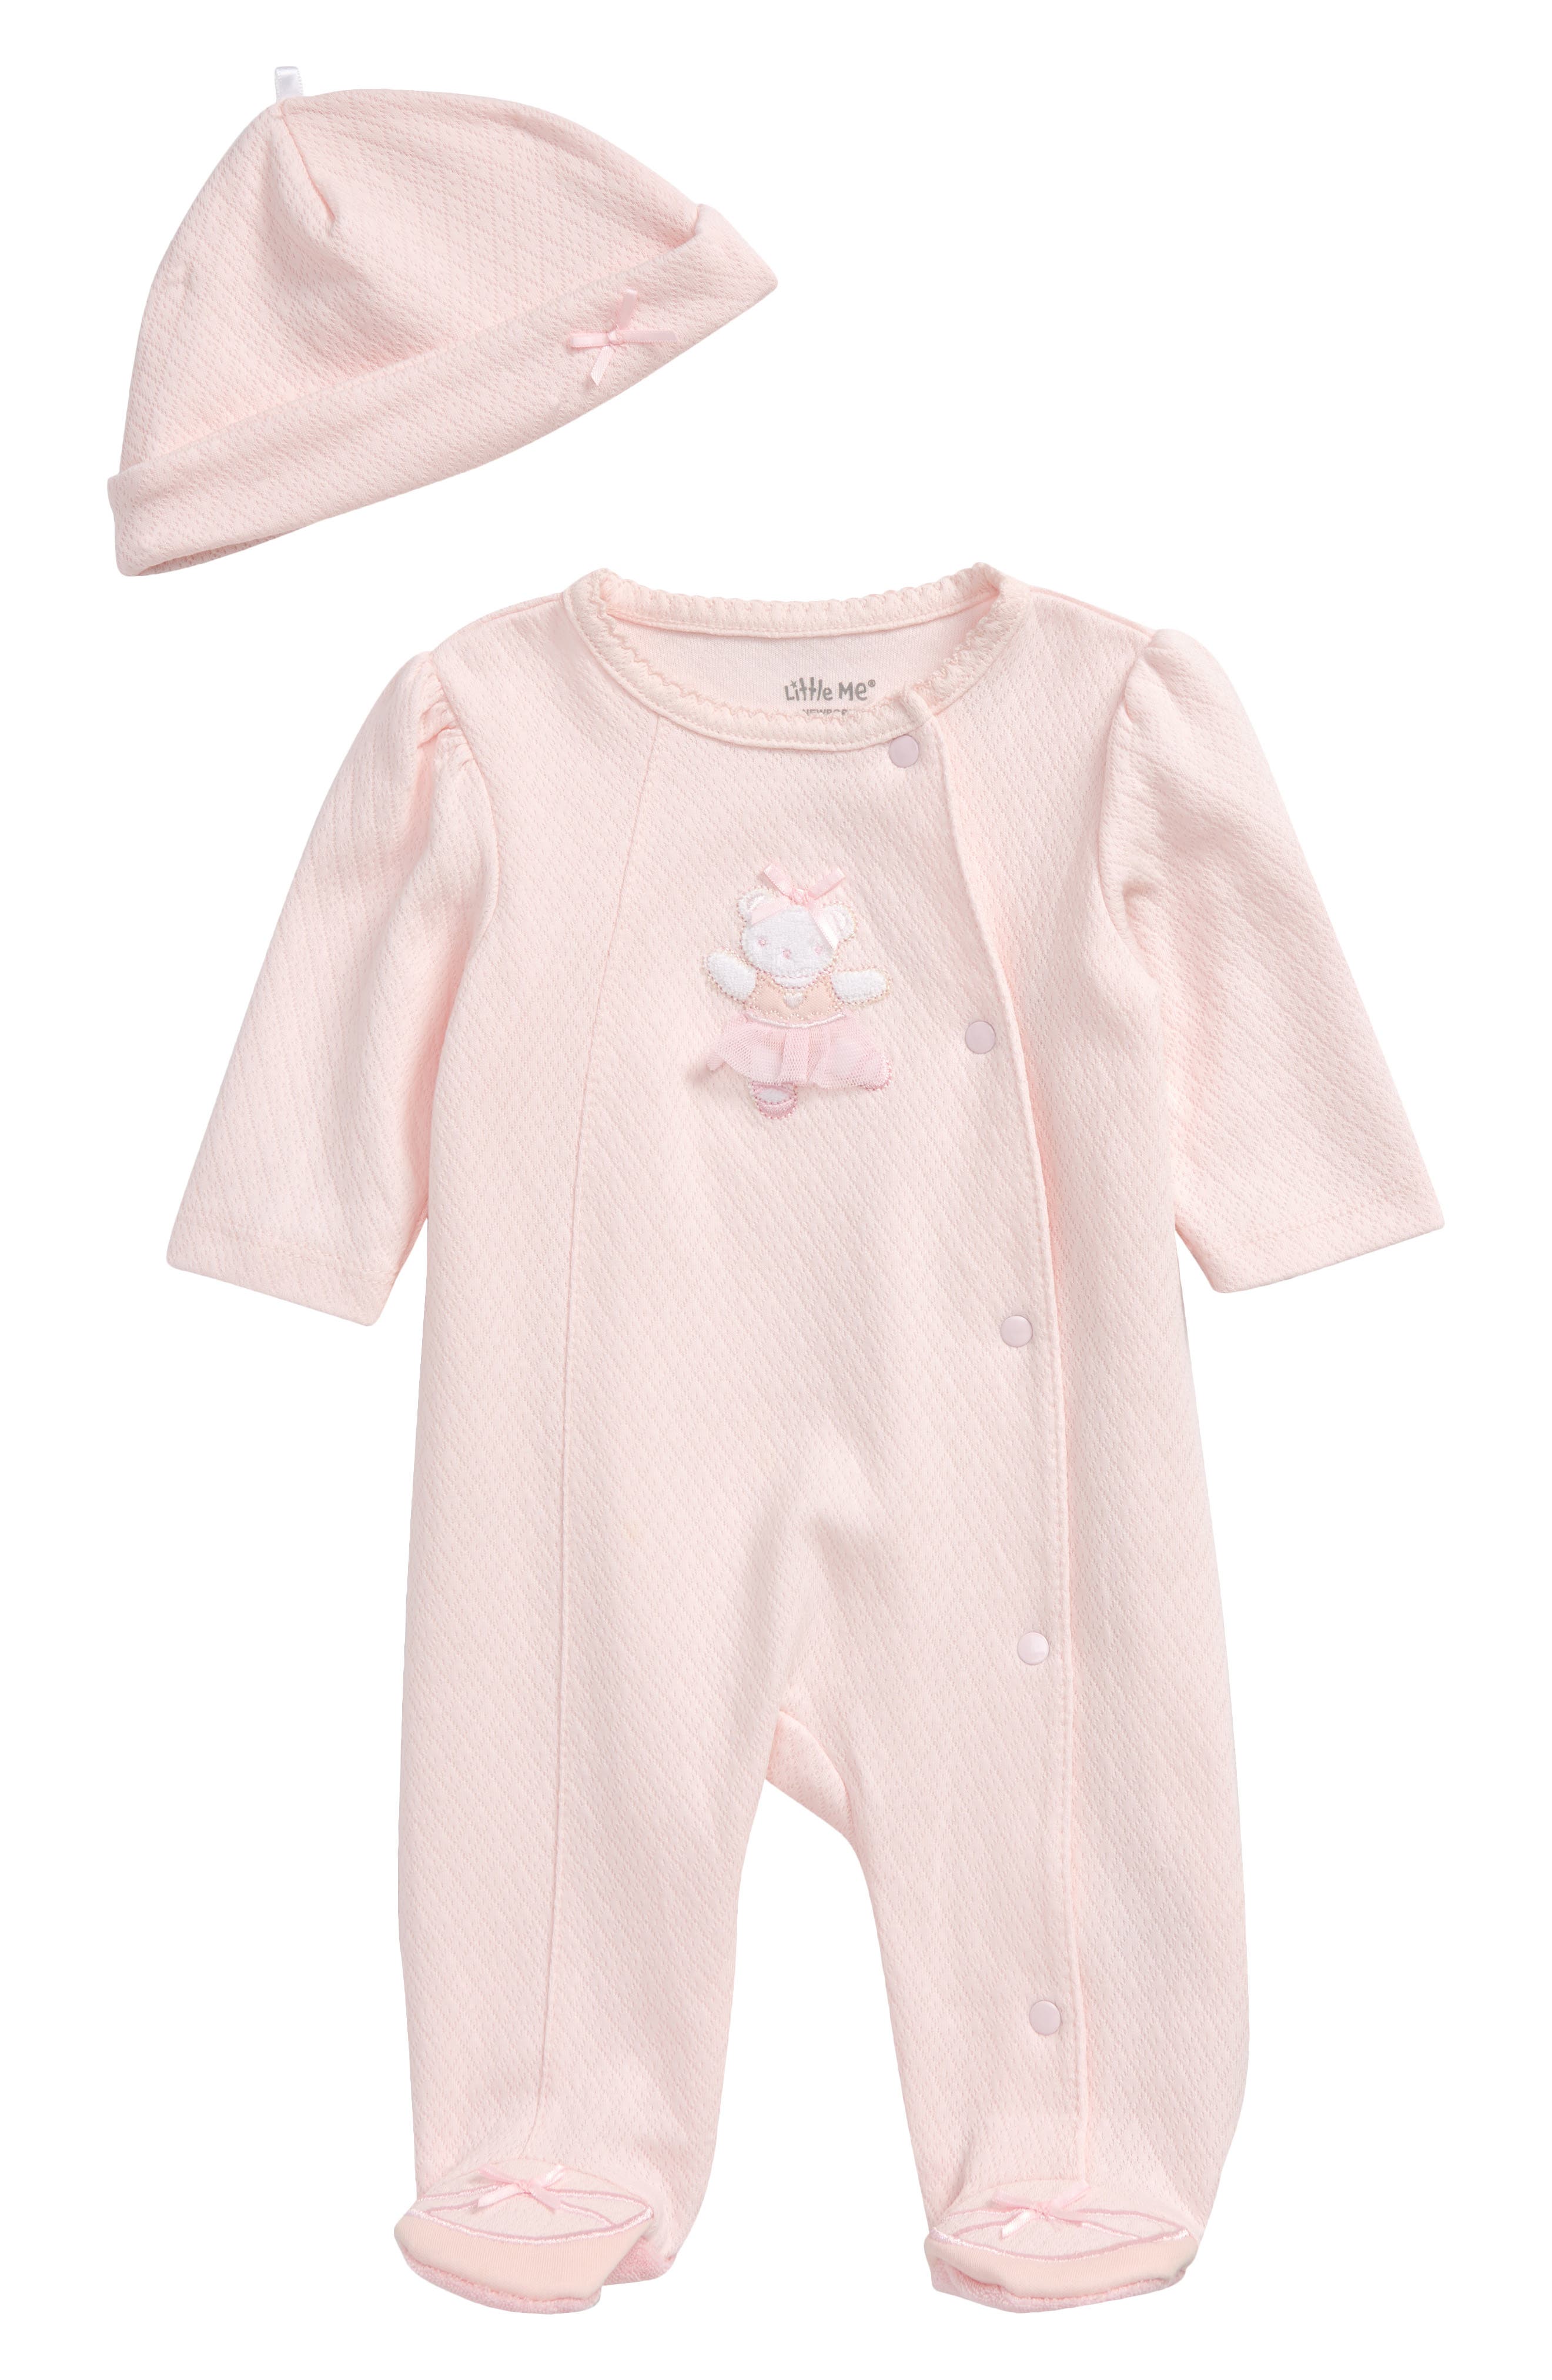 nordstrom rack baby girl clothes